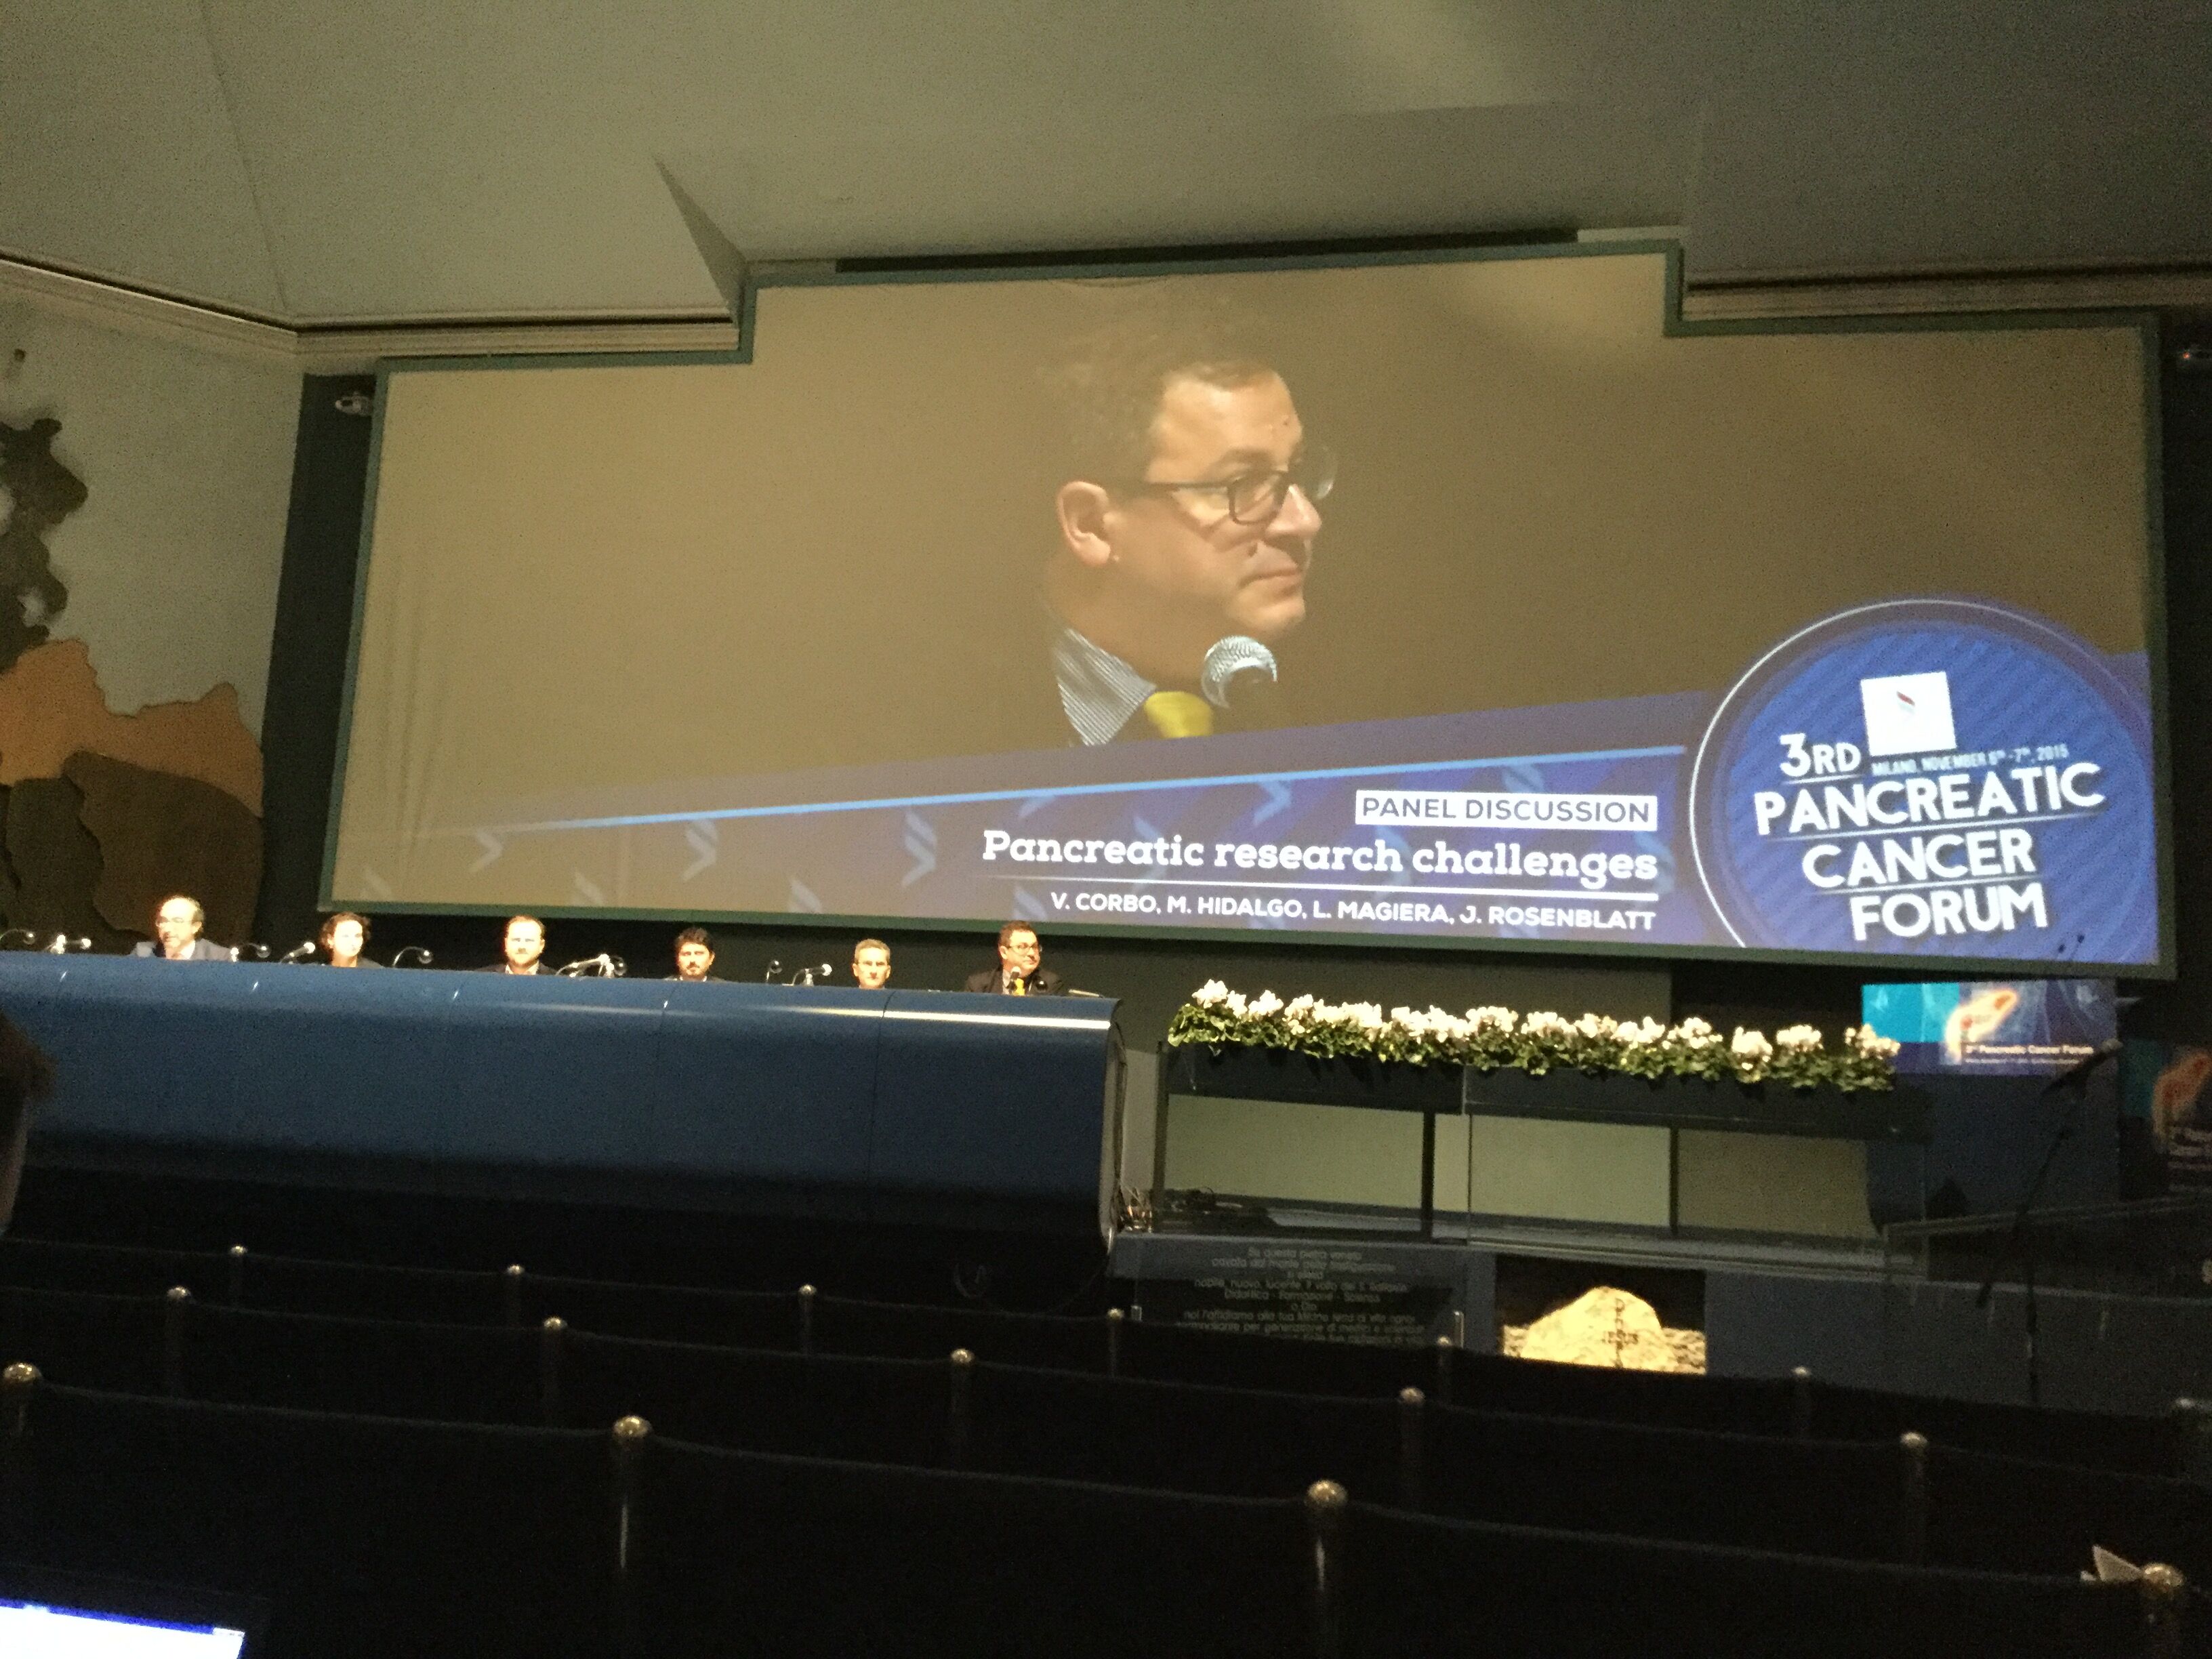 Dr. Funel at 3rd Pancreatic Cancer Forum - Milano 2015